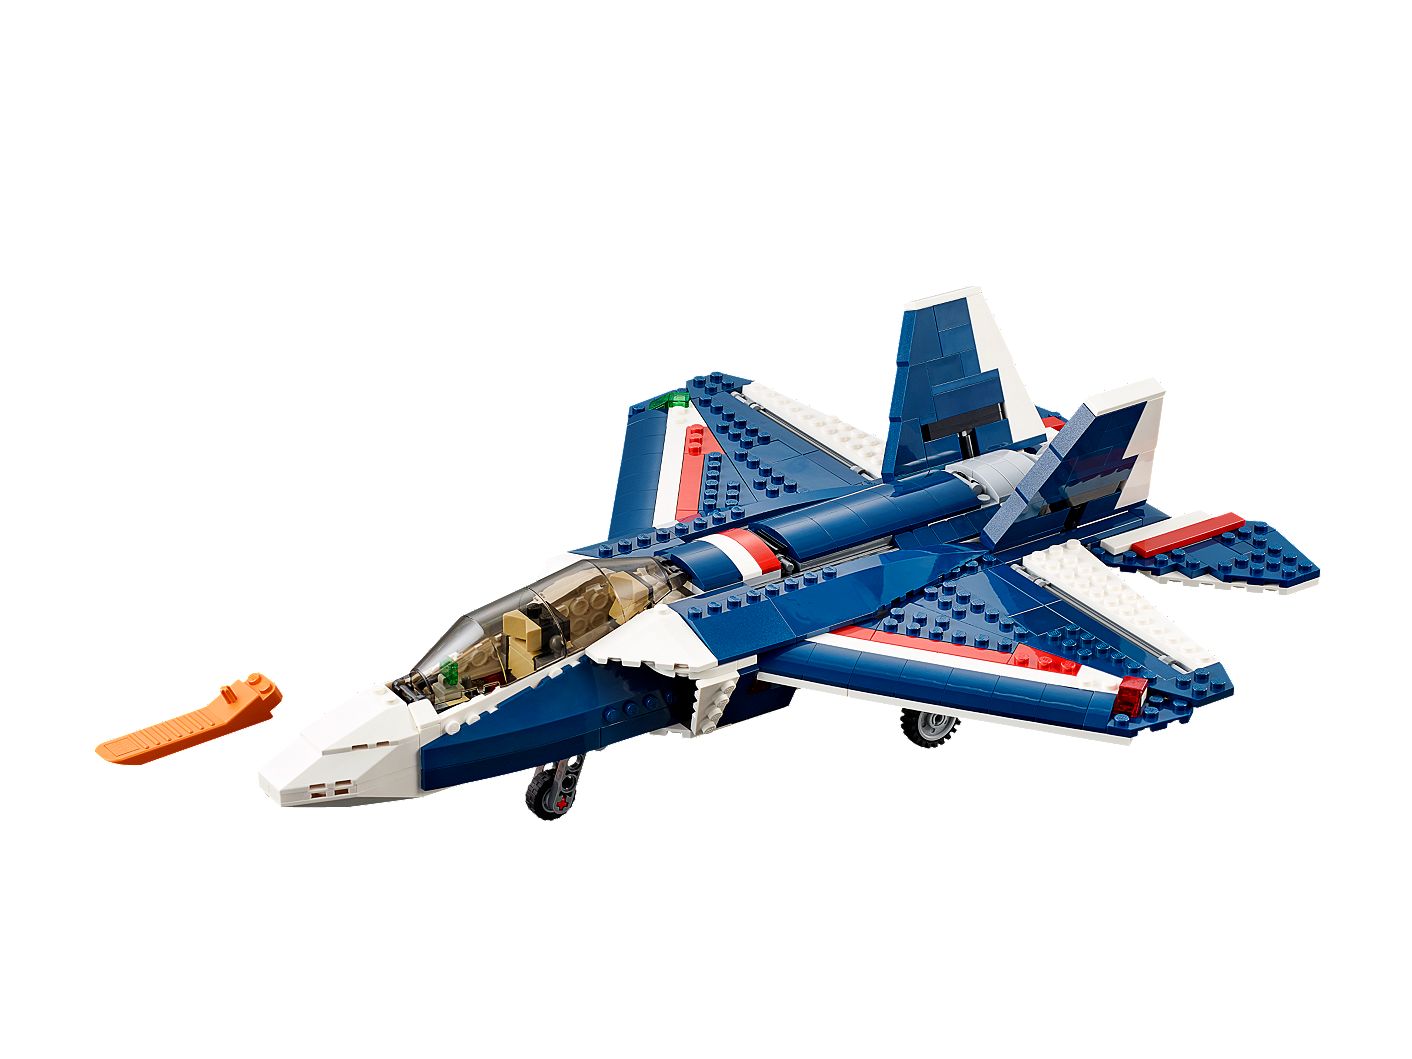 Blue Power Jet 31039 | Creator 3-in-1 | Buy online at the Official LEGO